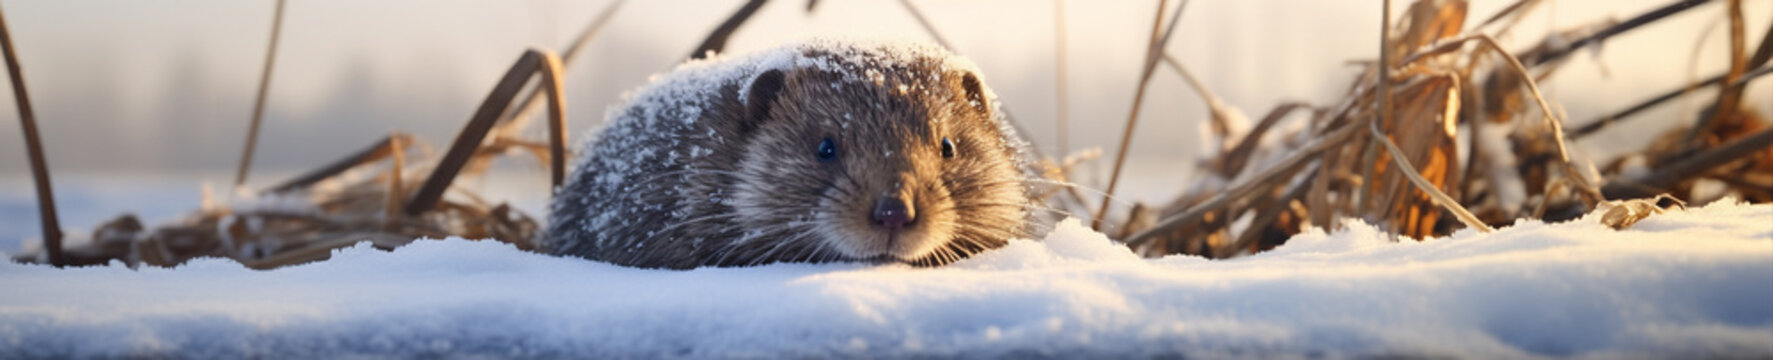 A Banner Photo of a Mole in a Winter Setting